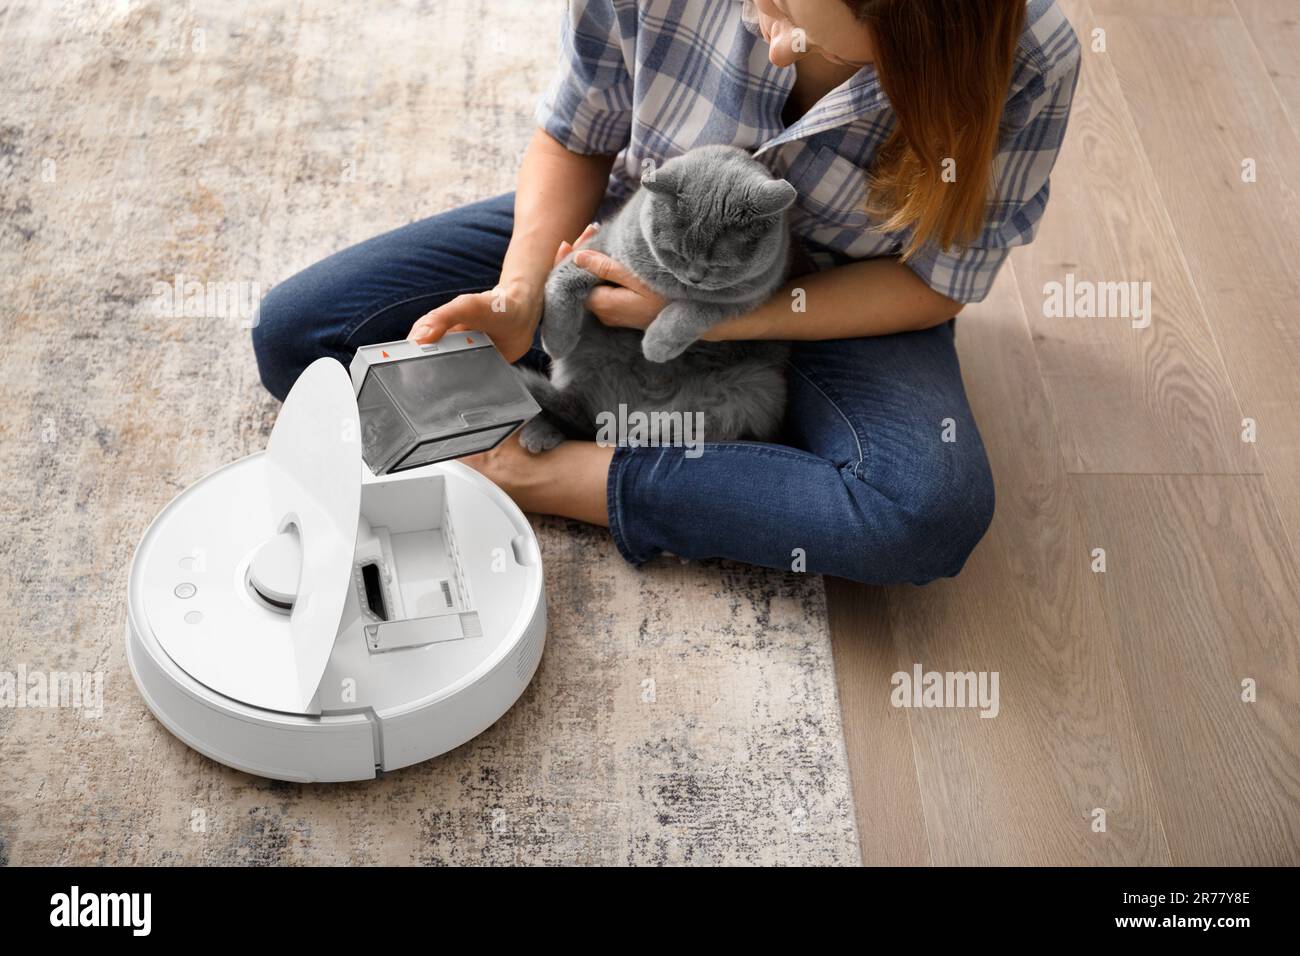 The container of the vacuum cleaner robot is in female hands, the dust collector of the robot vacuum cleaner is full of wool, the cat sits nearby Stock Photo